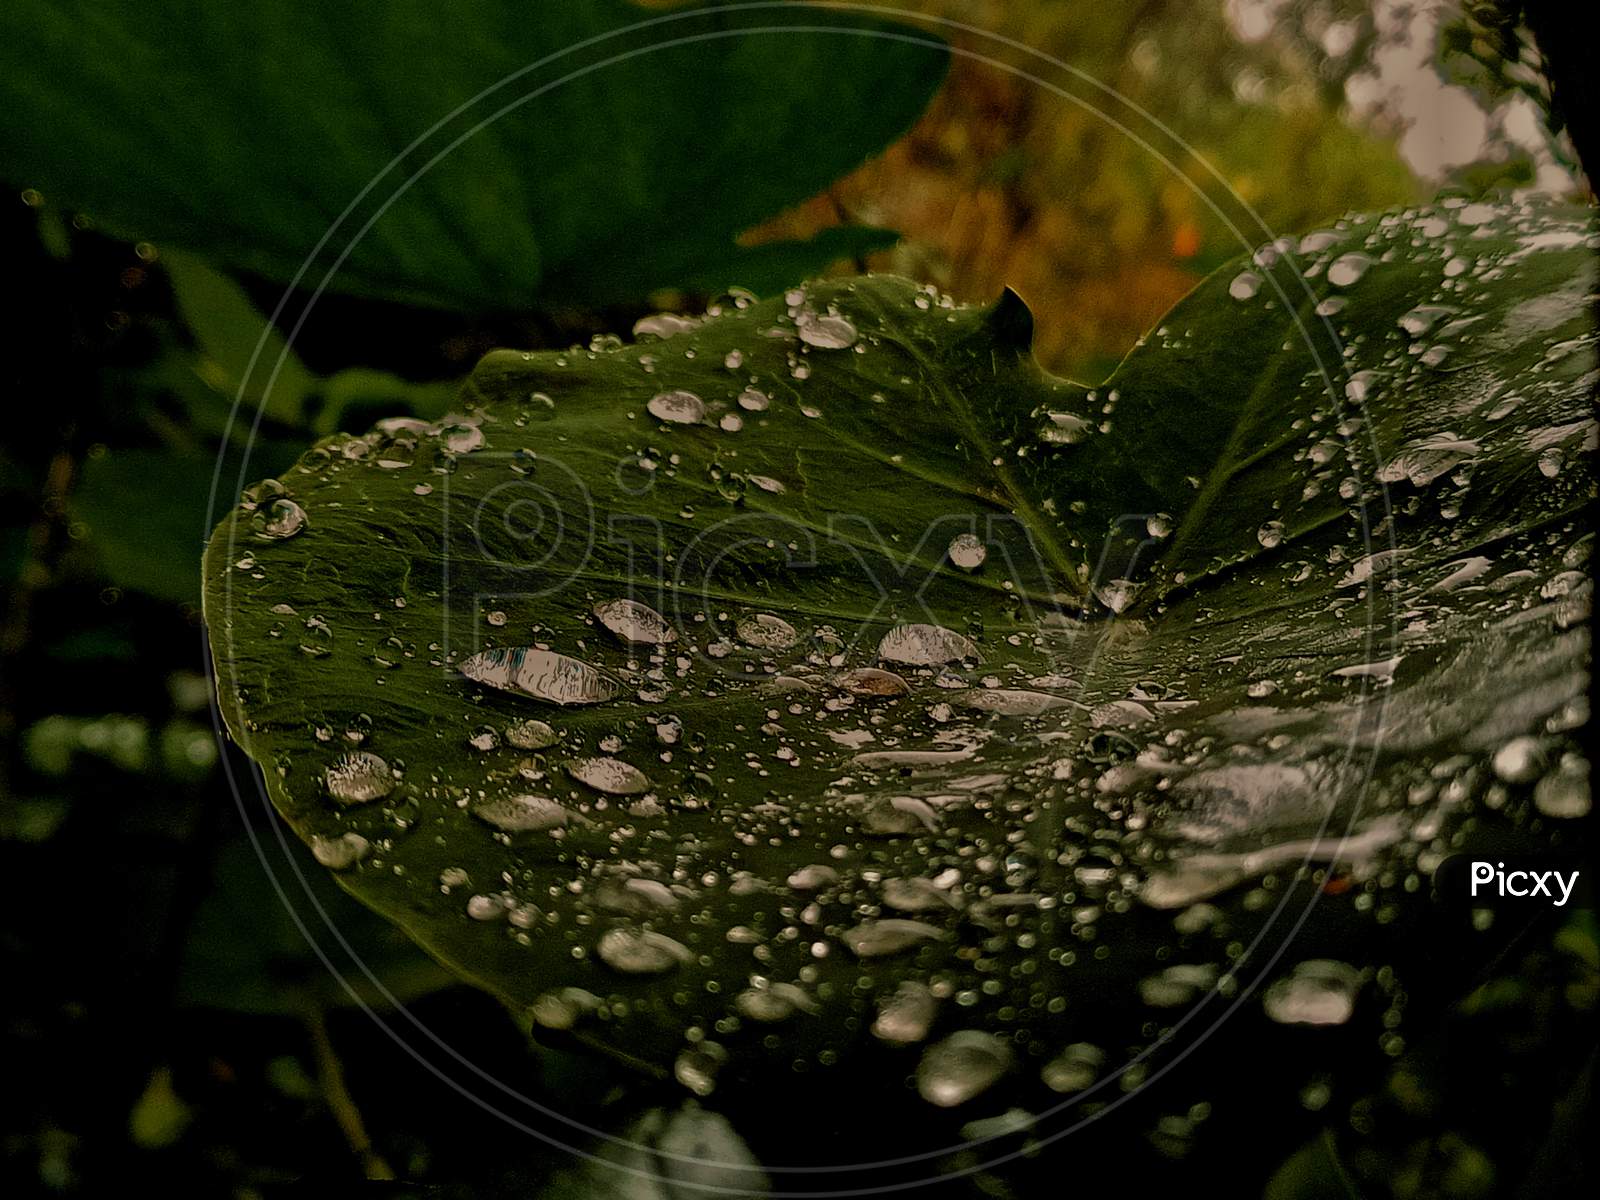 Water &leaf photography